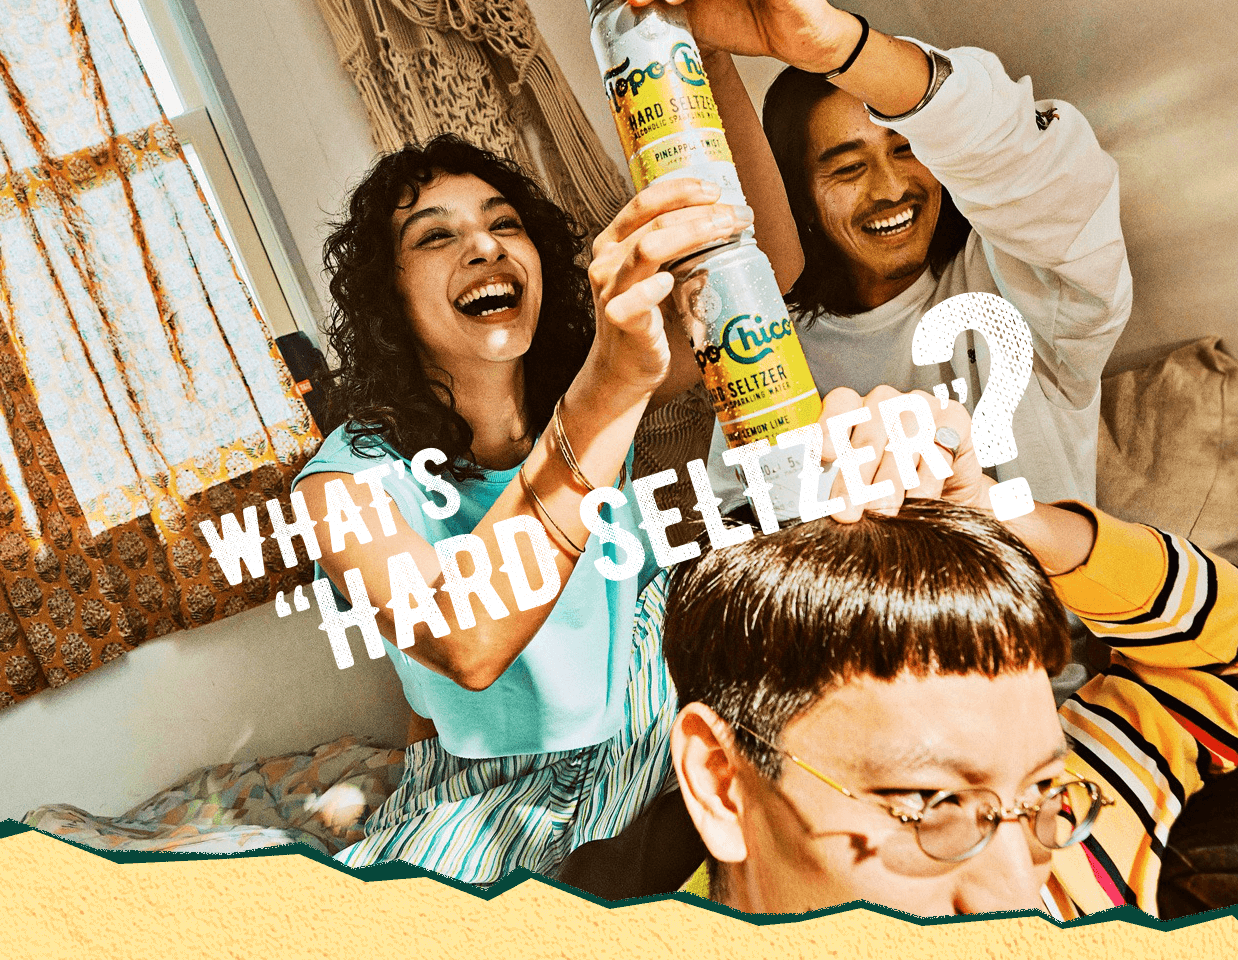 WHAT'S ″HARD SELTZER″?